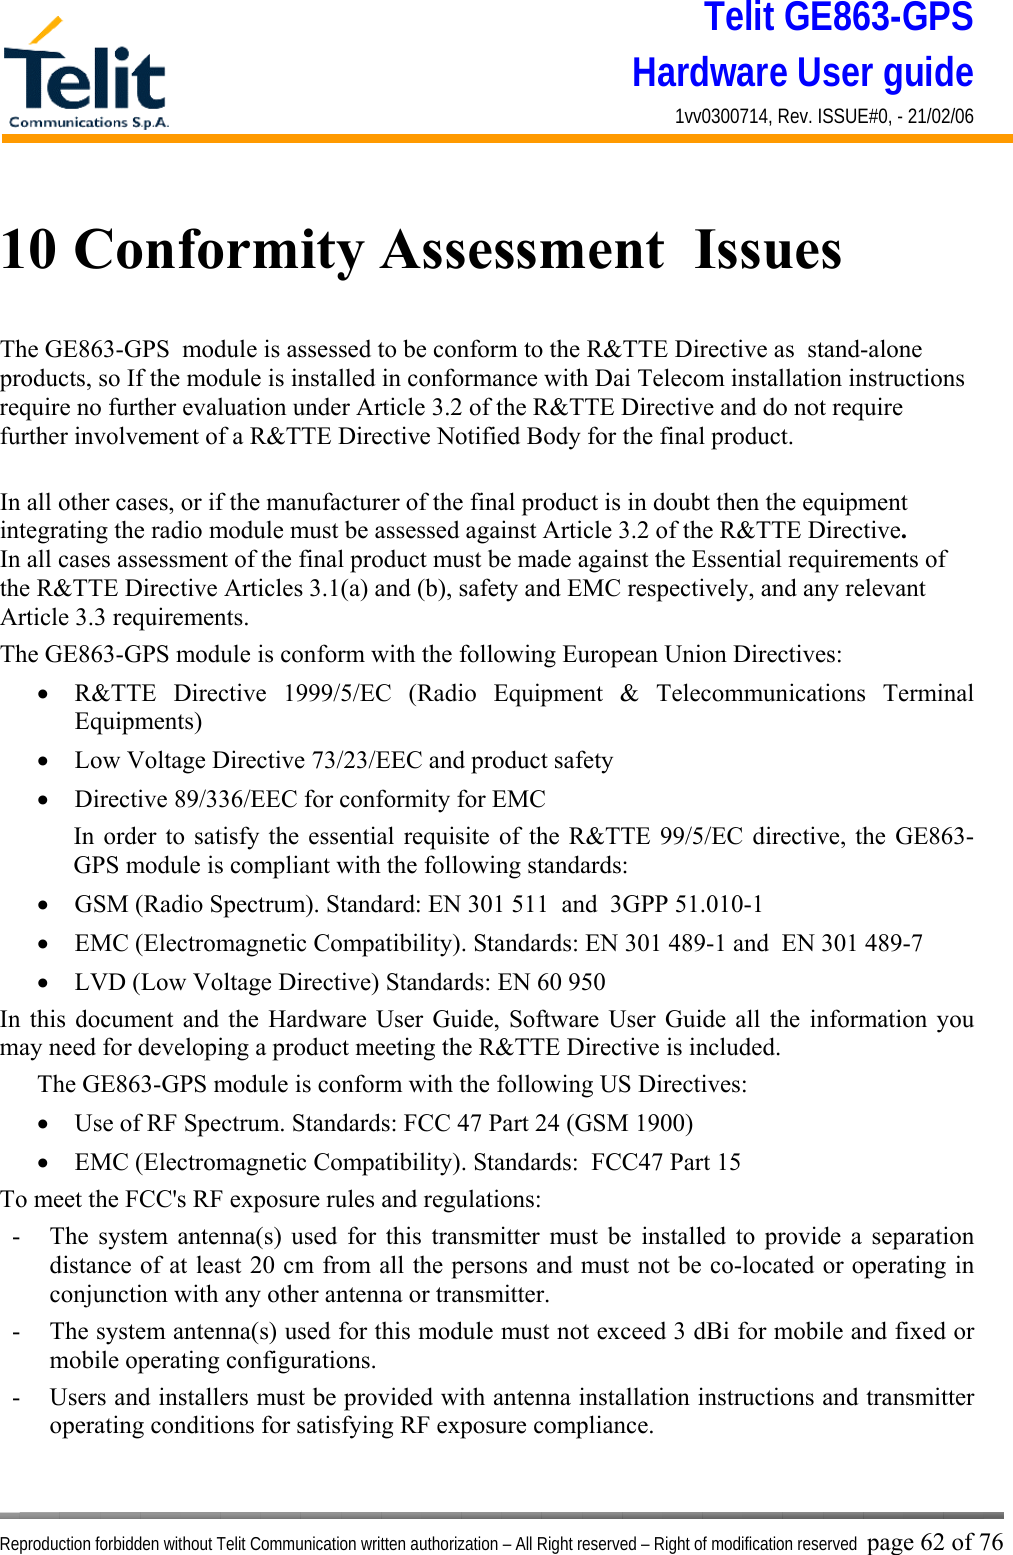 Telit GE863-GPS Hardware User guide 1vv0300714, Rev. ISSUE#0, - 21/02/06    Reproduction forbidden without Telit Communication written authorization – All Right reserved – Right of modification reserved page 62 of 76 10 Conformity Assessment  Issues The GE863-GPS  module is assessed to be conform to the R&amp;TTE Directive as  stand-alone products, so If the module is installed in conformance with Dai Telecom installation instructions require no further evaluation under Article 3.2 of the R&amp;TTE Directive and do not require further involvement of a R&amp;TTE Directive Notified Body for the final product.  In all other cases, or if the manufacturer of the final product is in doubt then the equipment integrating the radio module must be assessed against Article 3.2 of the R&amp;TTE Directive.  In all cases assessment of the final product must be made against the Essential requirements of the R&amp;TTE Directive Articles 3.1(a) and (b), safety and EMC respectively, and any relevant Article 3.3 requirements. The GE863-GPS module is conform with the following European Union Directives: •  R&amp;TTE Directive 1999/5/EC (Radio Equipment &amp; Telecommunications Terminal Equipments) •  Low Voltage Directive 73/23/EEC and product safety •  Directive 89/336/EEC for conformity for EMC In order to satisfy the essential requisite of the R&amp;TTE 99/5/EC directive, the GE863-GPS module is compliant with the following standards:  •  GSM (Radio Spectrum). Standard: EN 301 511  and  3GPP 51.010-1  •  EMC (Electromagnetic Compatibility). Standards: EN 301 489-1 and  EN 301 489-7 •  LVD (Low Voltage Directive) Standards: EN 60 950 In this document and the Hardware User Guide, Software User Guide all the information you may need for developing a product meeting the R&amp;TTE Directive is included. The GE863-GPS module is conform with the following US Directives: •  Use of RF Spectrum. Standards: FCC 47 Part 24 (GSM 1900) •  EMC (Electromagnetic Compatibility). Standards:  FCC47 Part 15 To meet the FCC&apos;s RF exposure rules and regulations: -  The system antenna(s) used for this transmitter must be installed to provide a separation distance of at least 20 cm from all the persons and must not be co-located or operating in conjunction with any other antenna or transmitter. -  The system antenna(s) used for this module must not exceed 3 dBi for mobile and fixed or mobile operating configurations. -  Users and installers must be provided with antenna installation instructions and transmitter operating conditions for satisfying RF exposure compliance. 